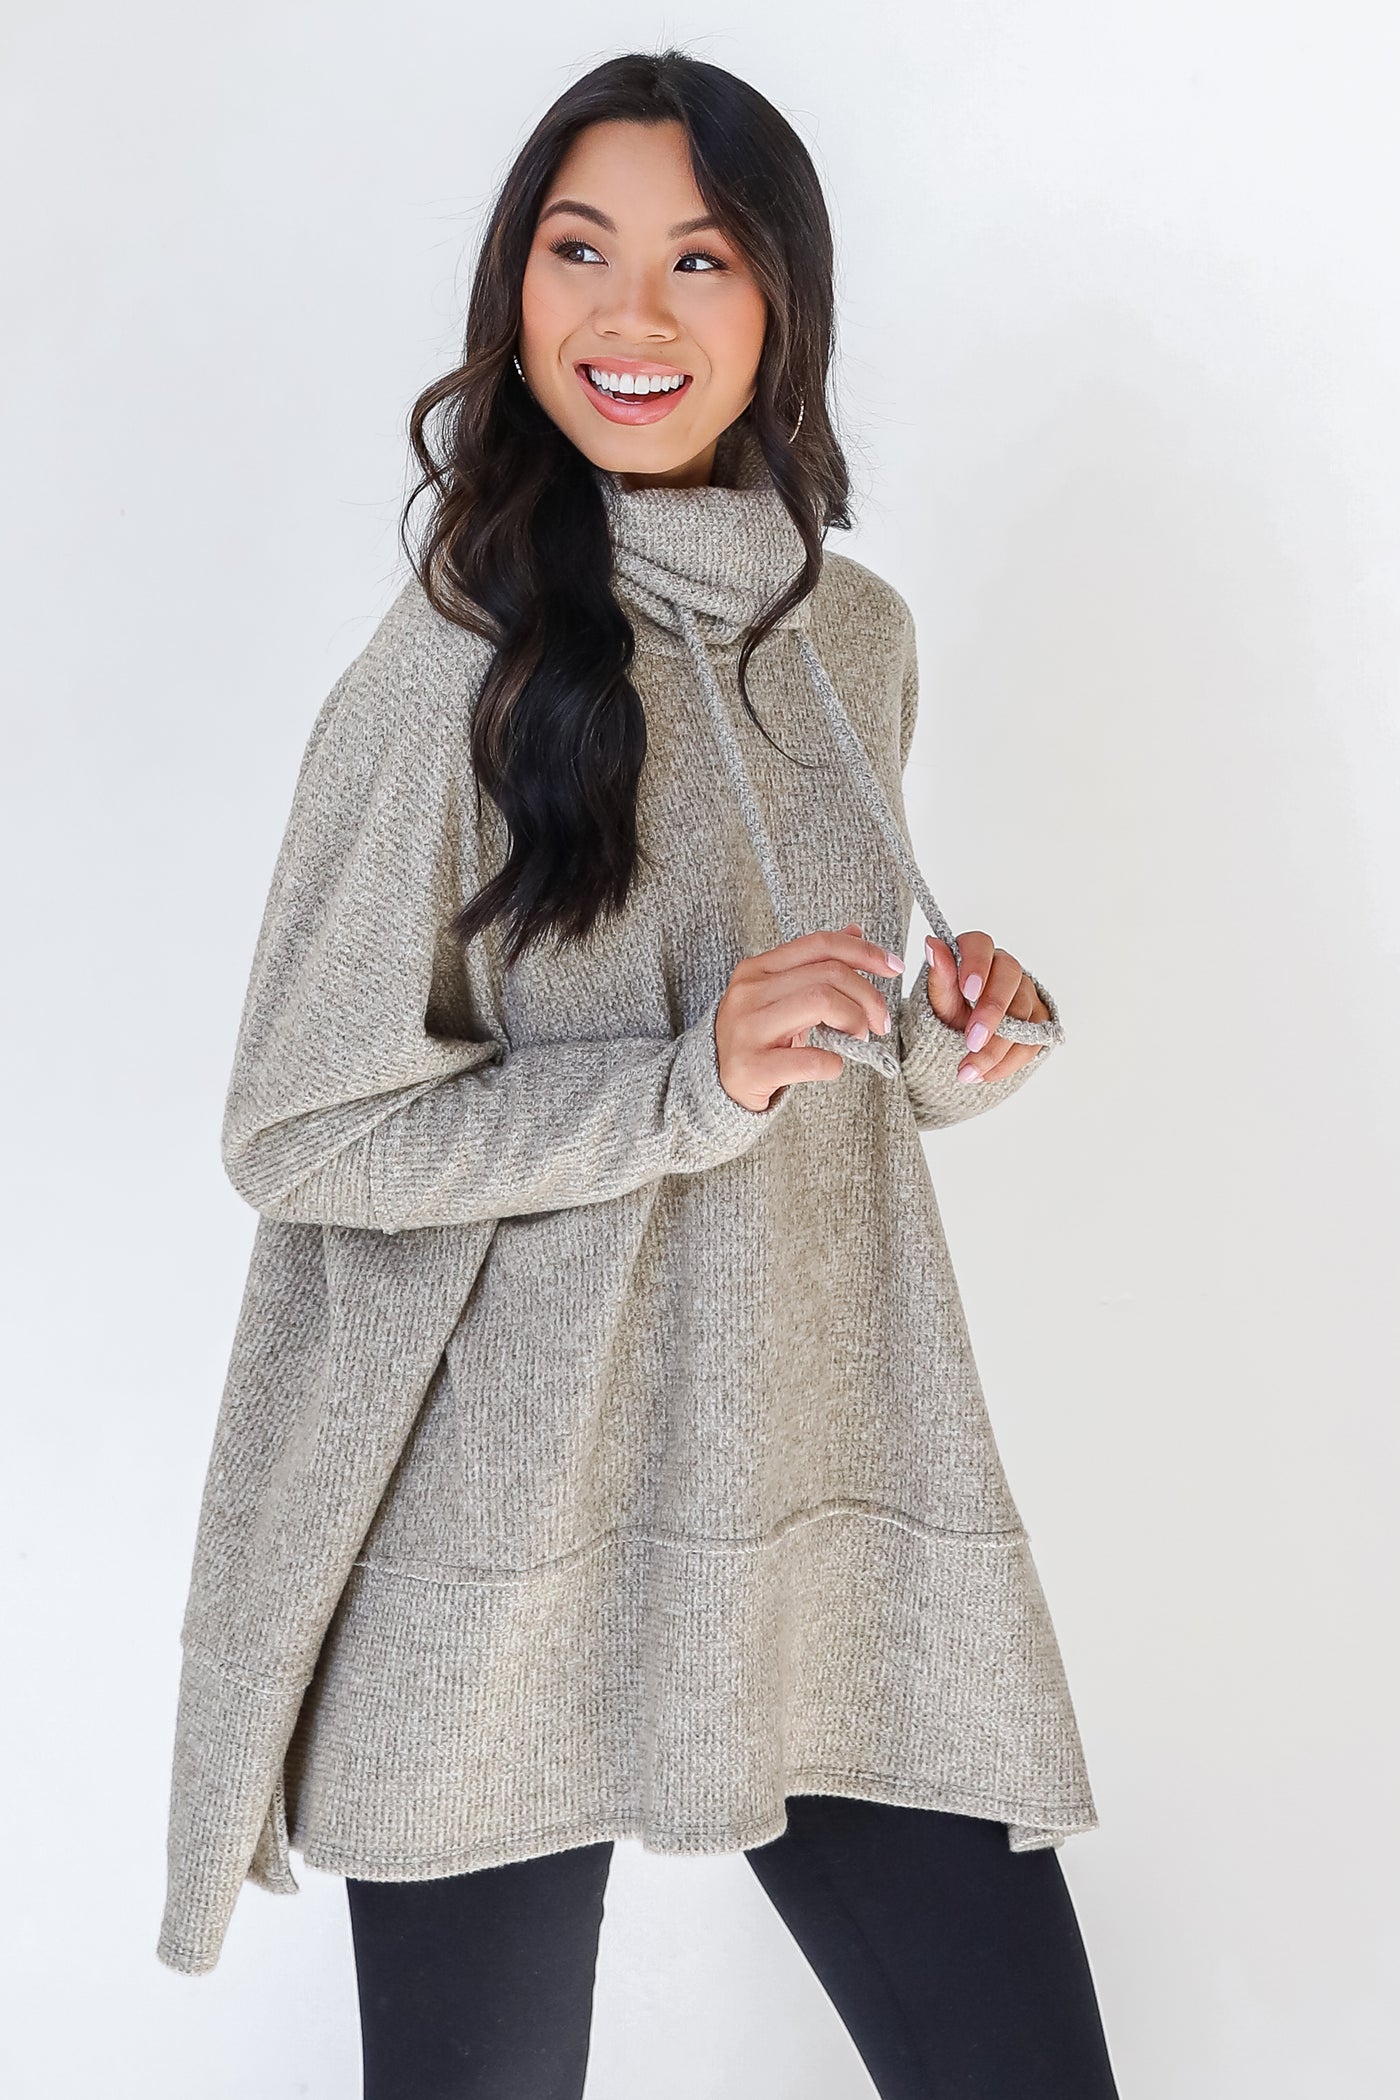 Oversized Cowl Neck Sweater in olive